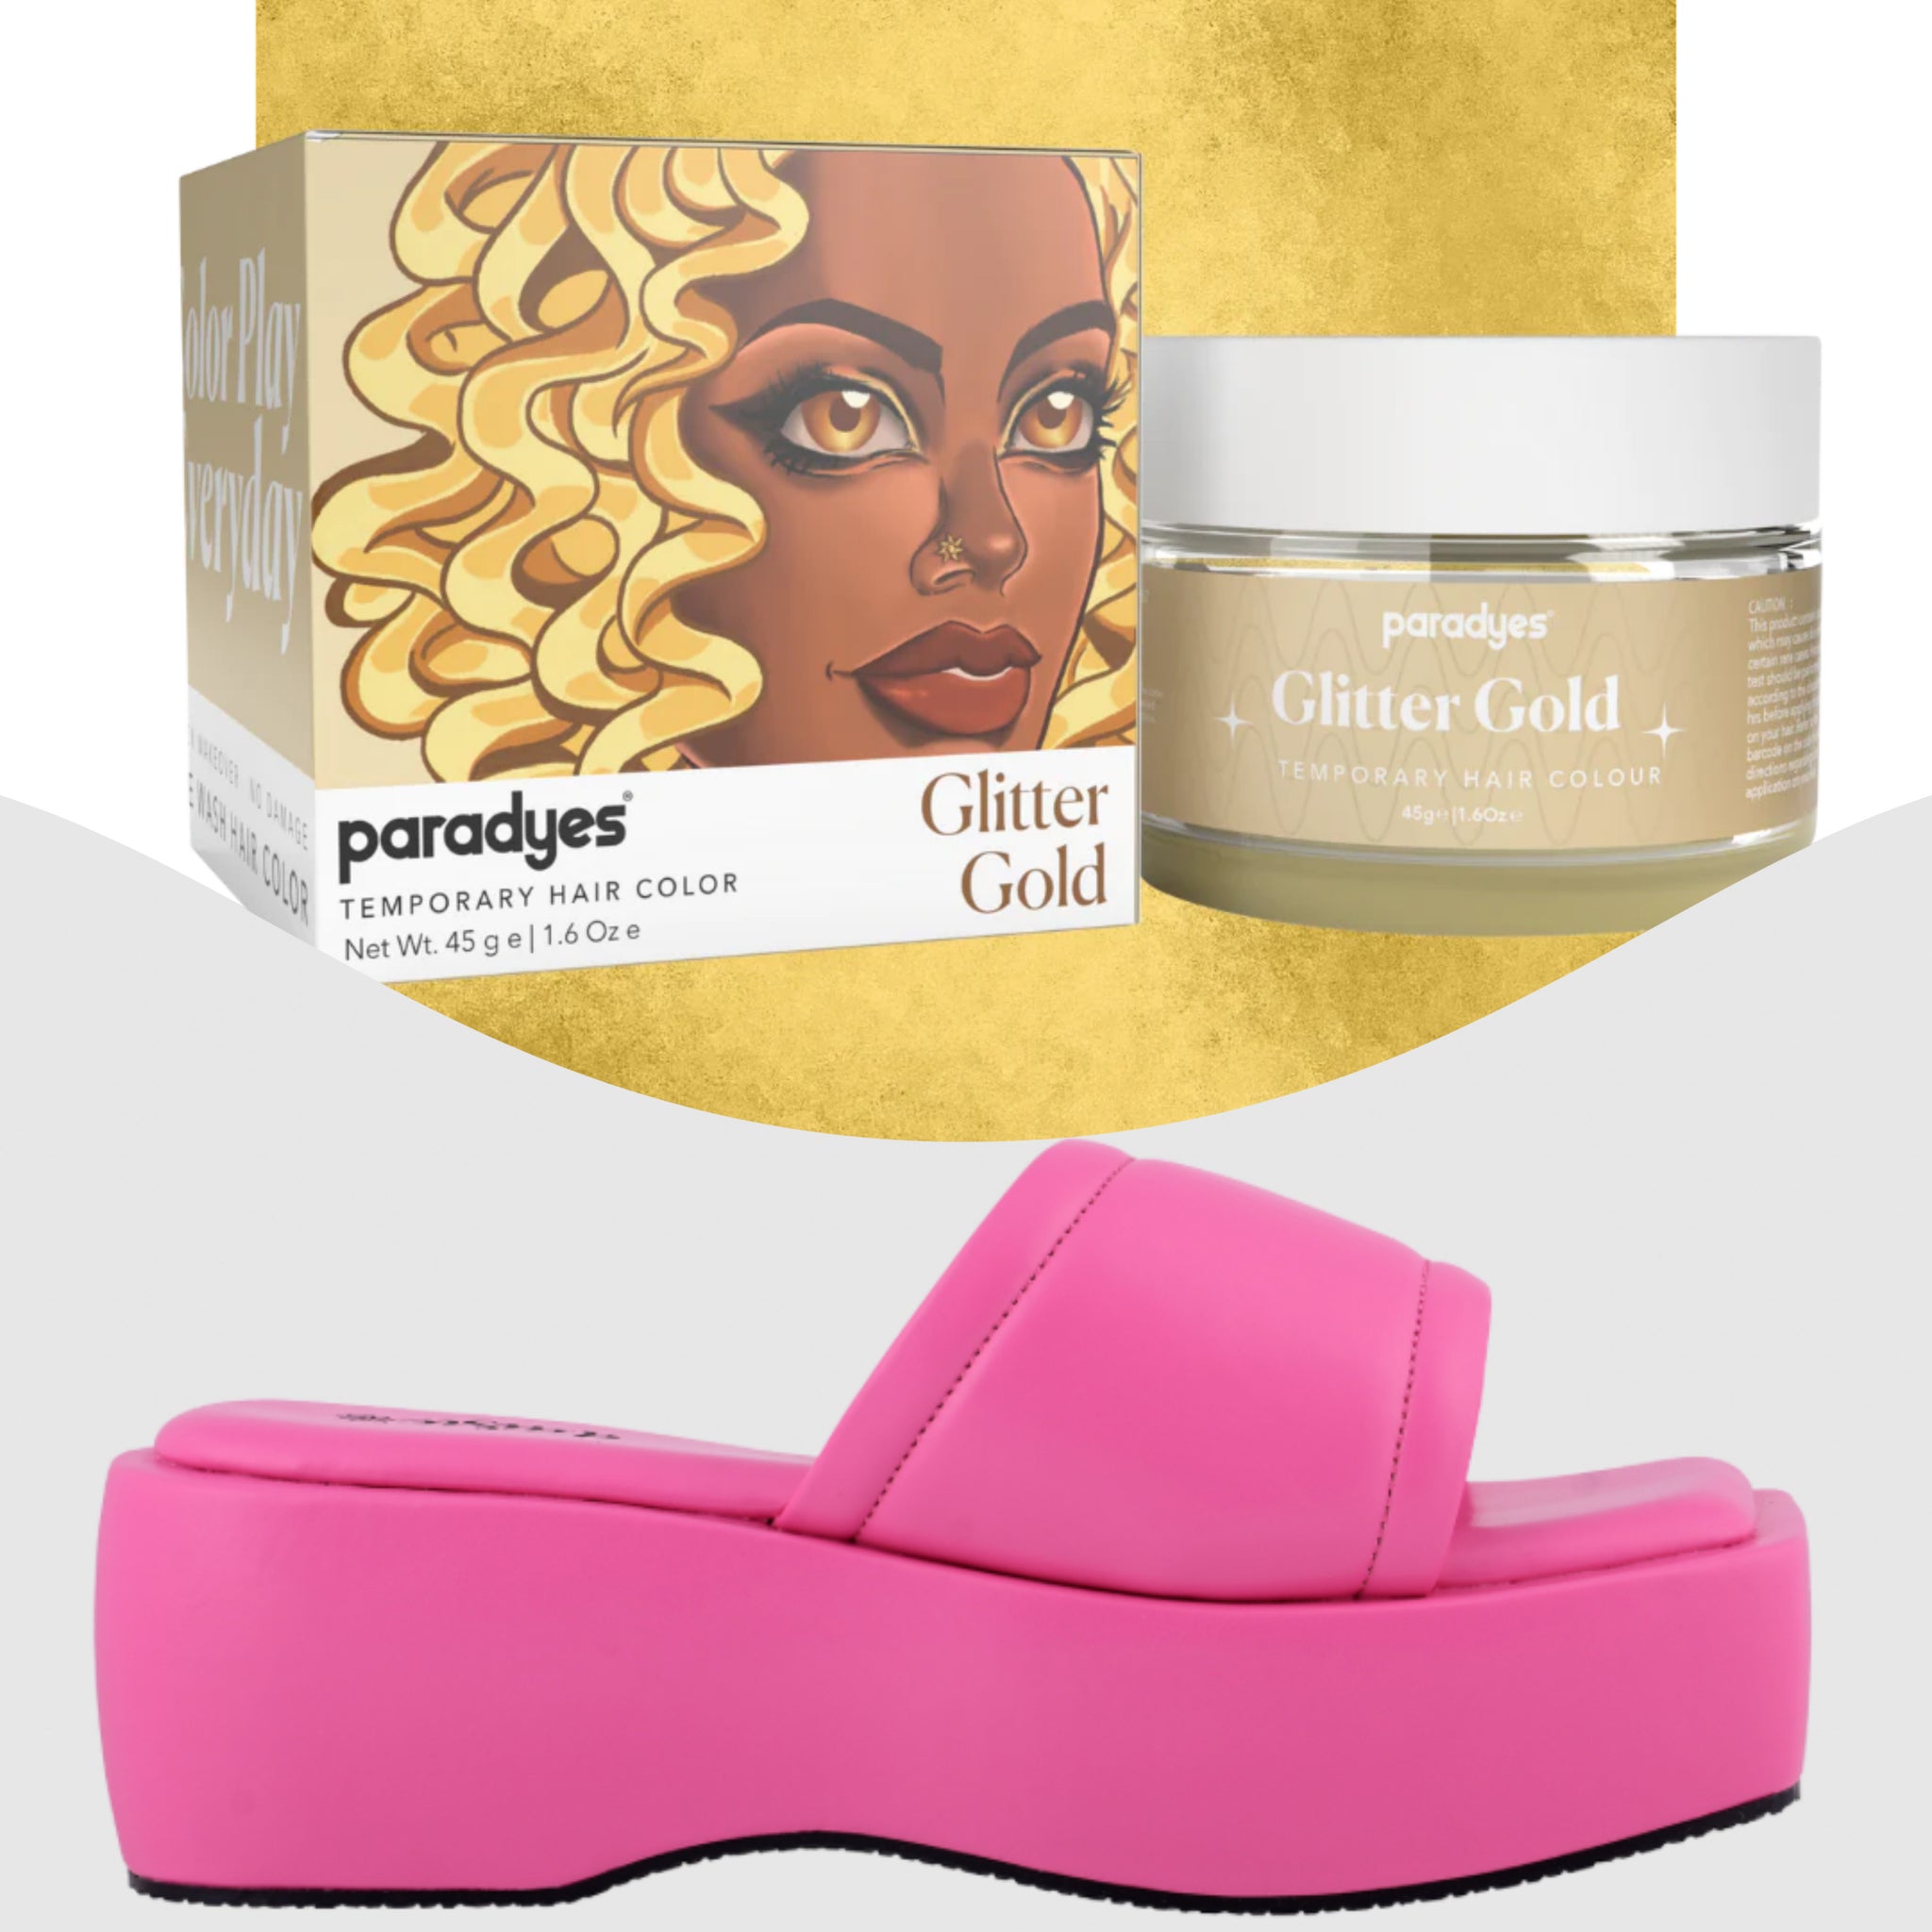 Paradyes Glitter Gold Temporary Hair Color +  Chunky Broad Strap Pink platforms